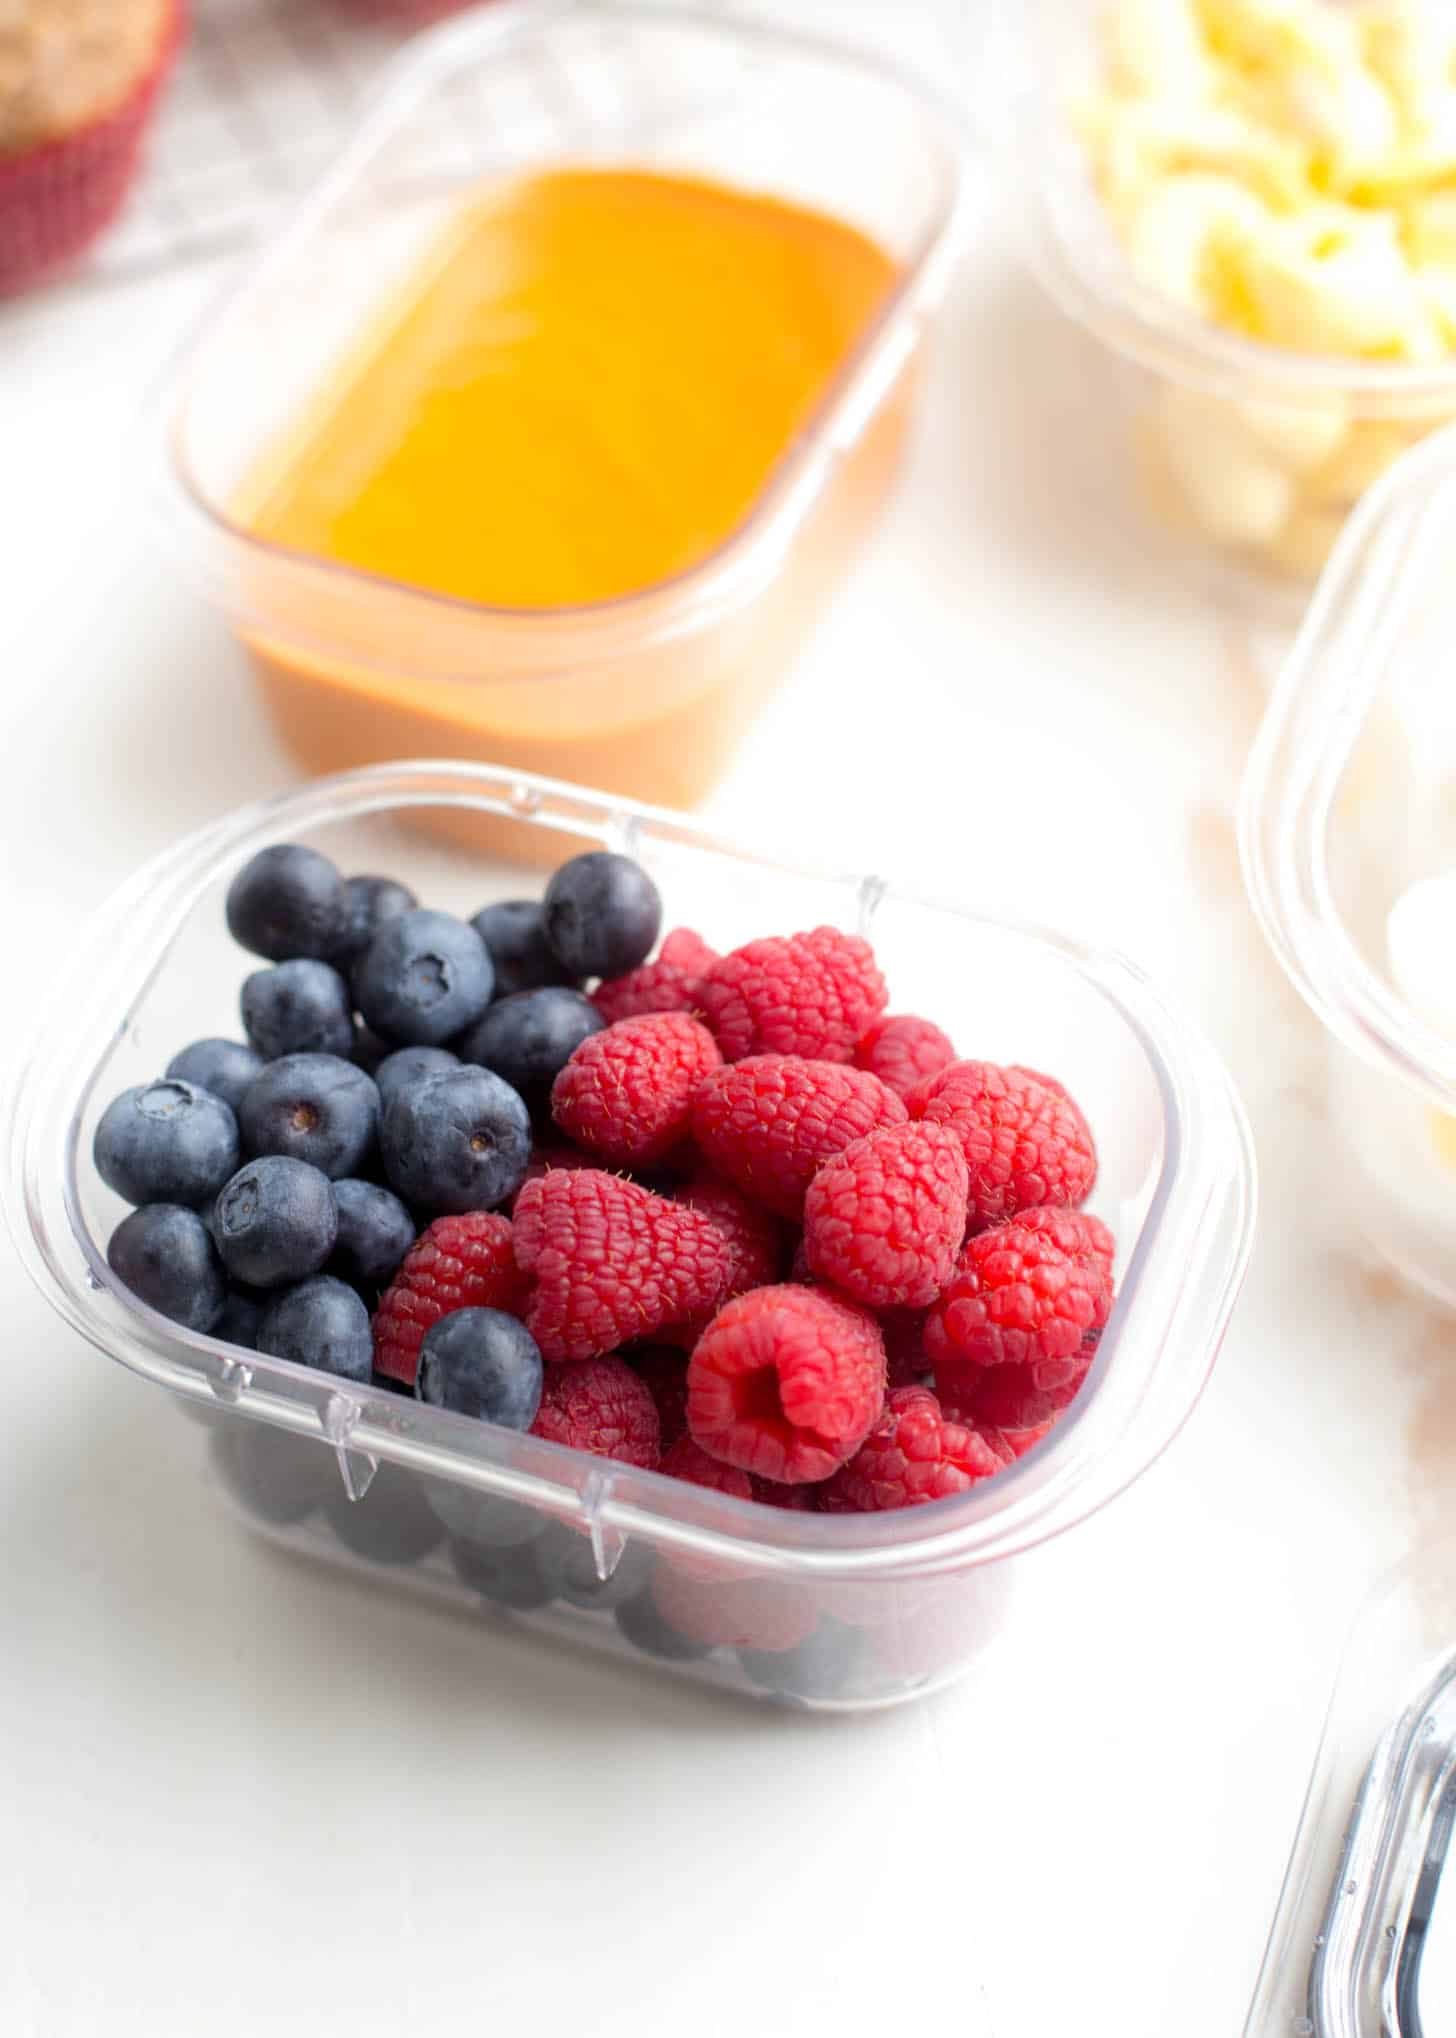 blueberries and raspberries in a plastic container